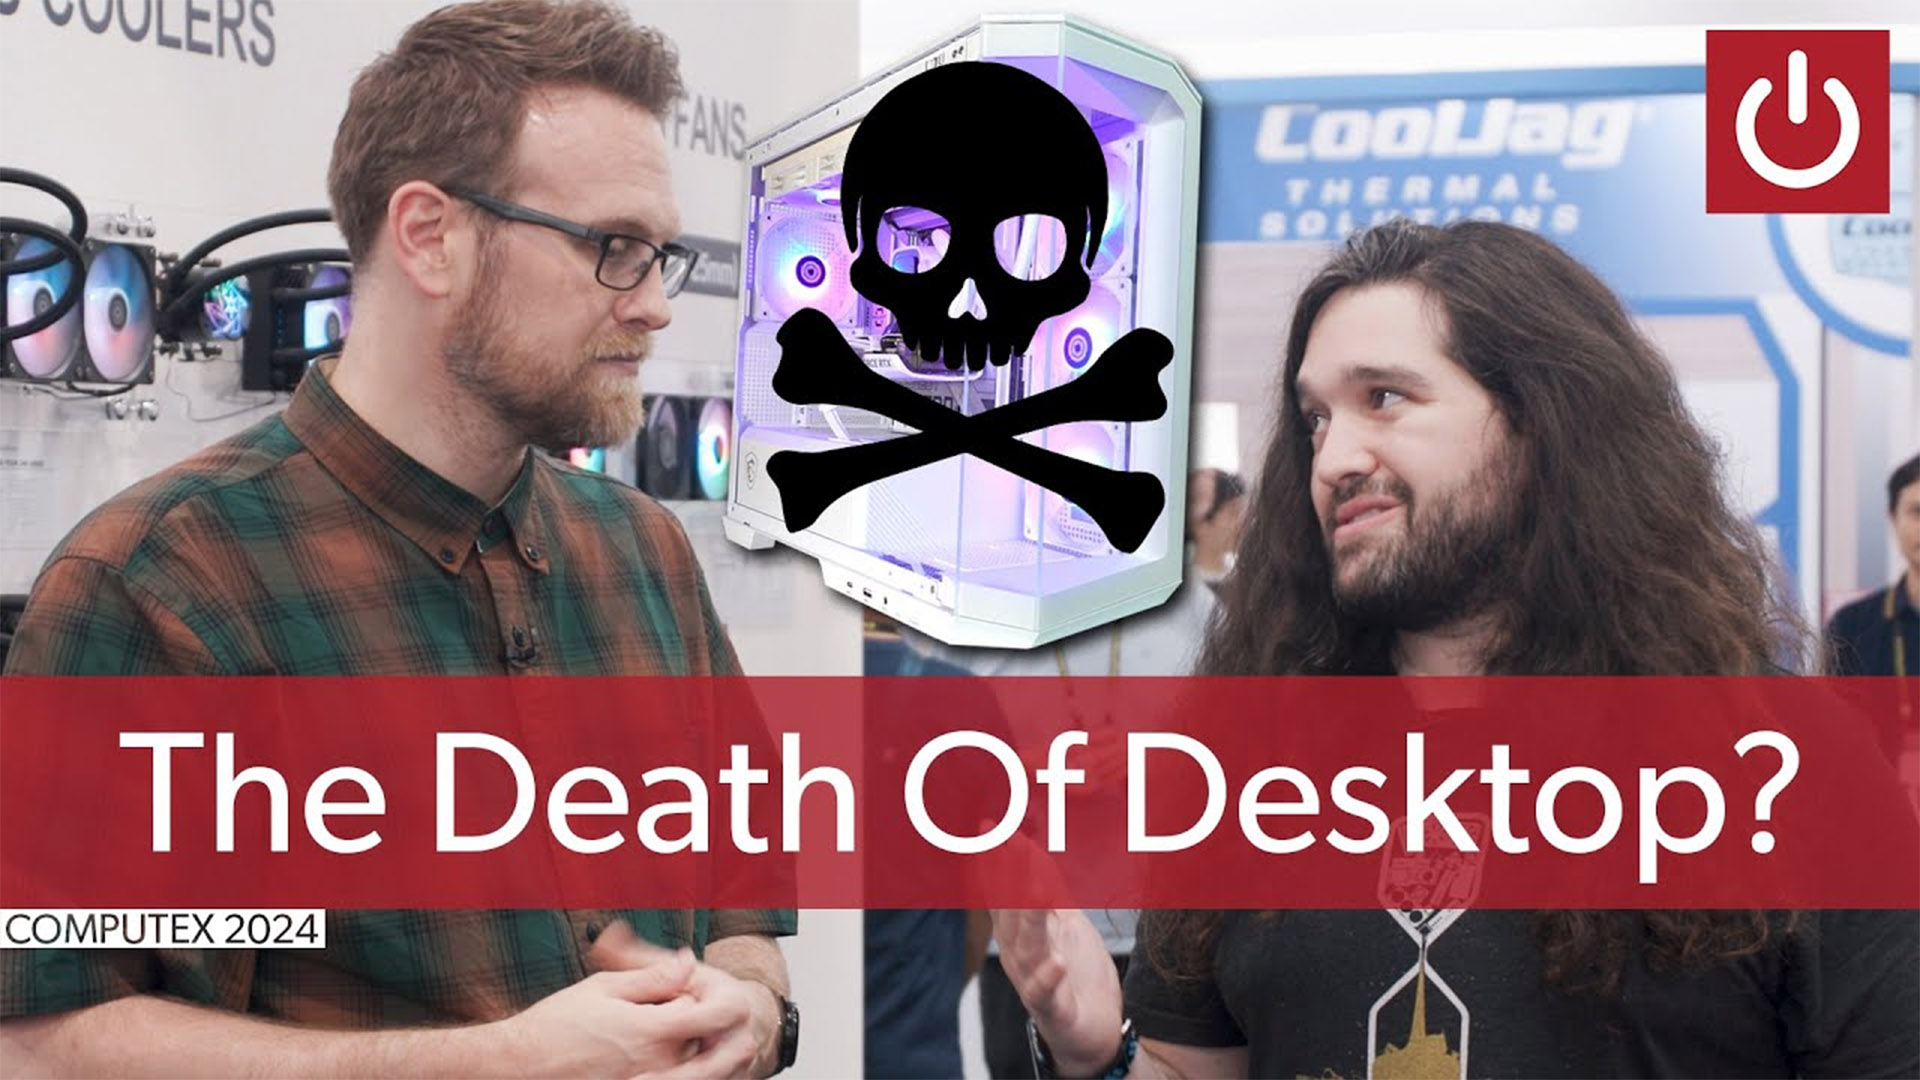 Is the desktop PC on its way out? Steve of GamersNexus chimes in